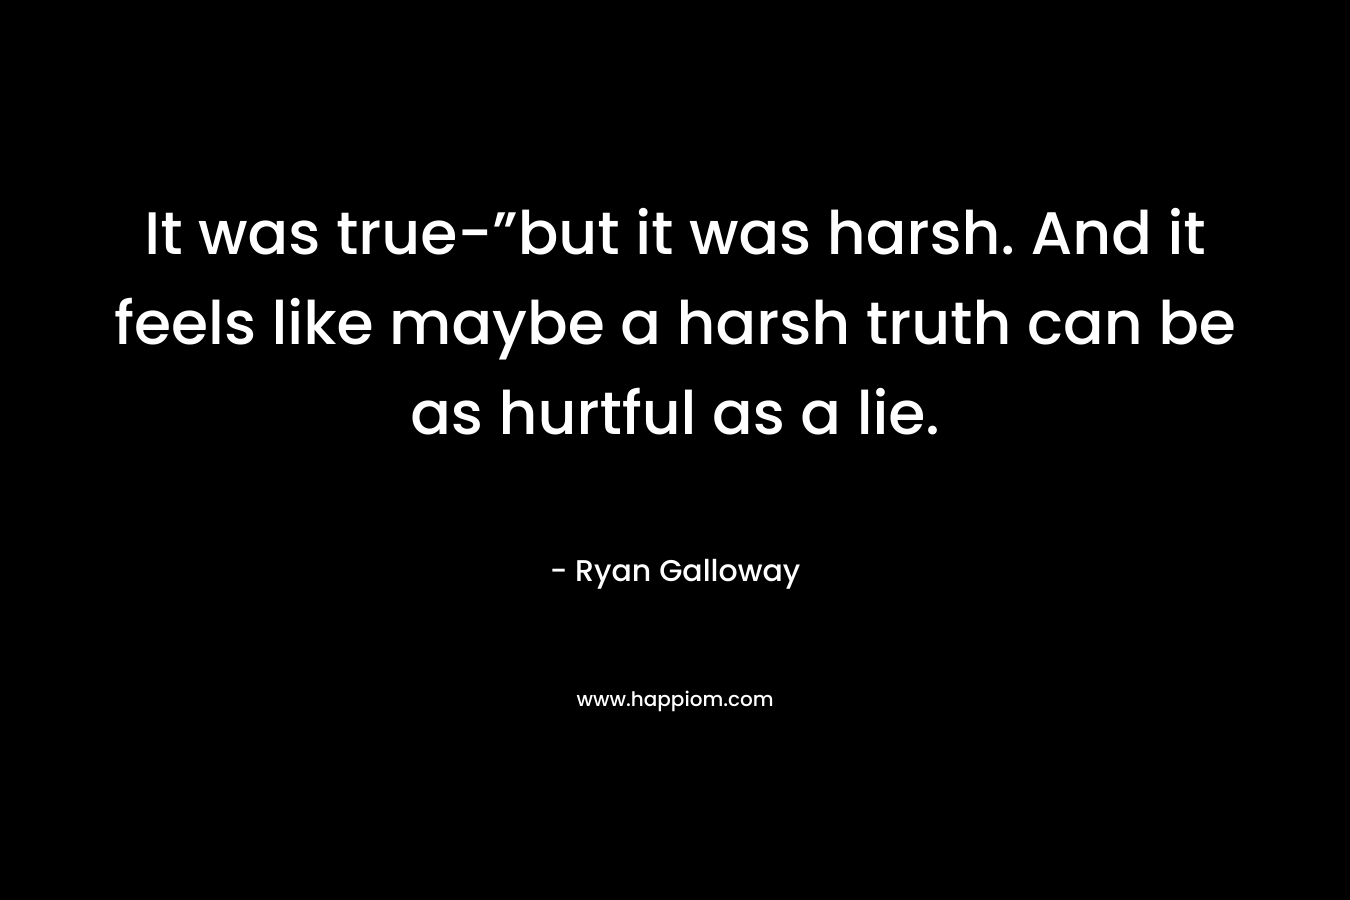 It was true-”but it was harsh. And it feels like maybe a harsh truth can be as hurtful as a lie.